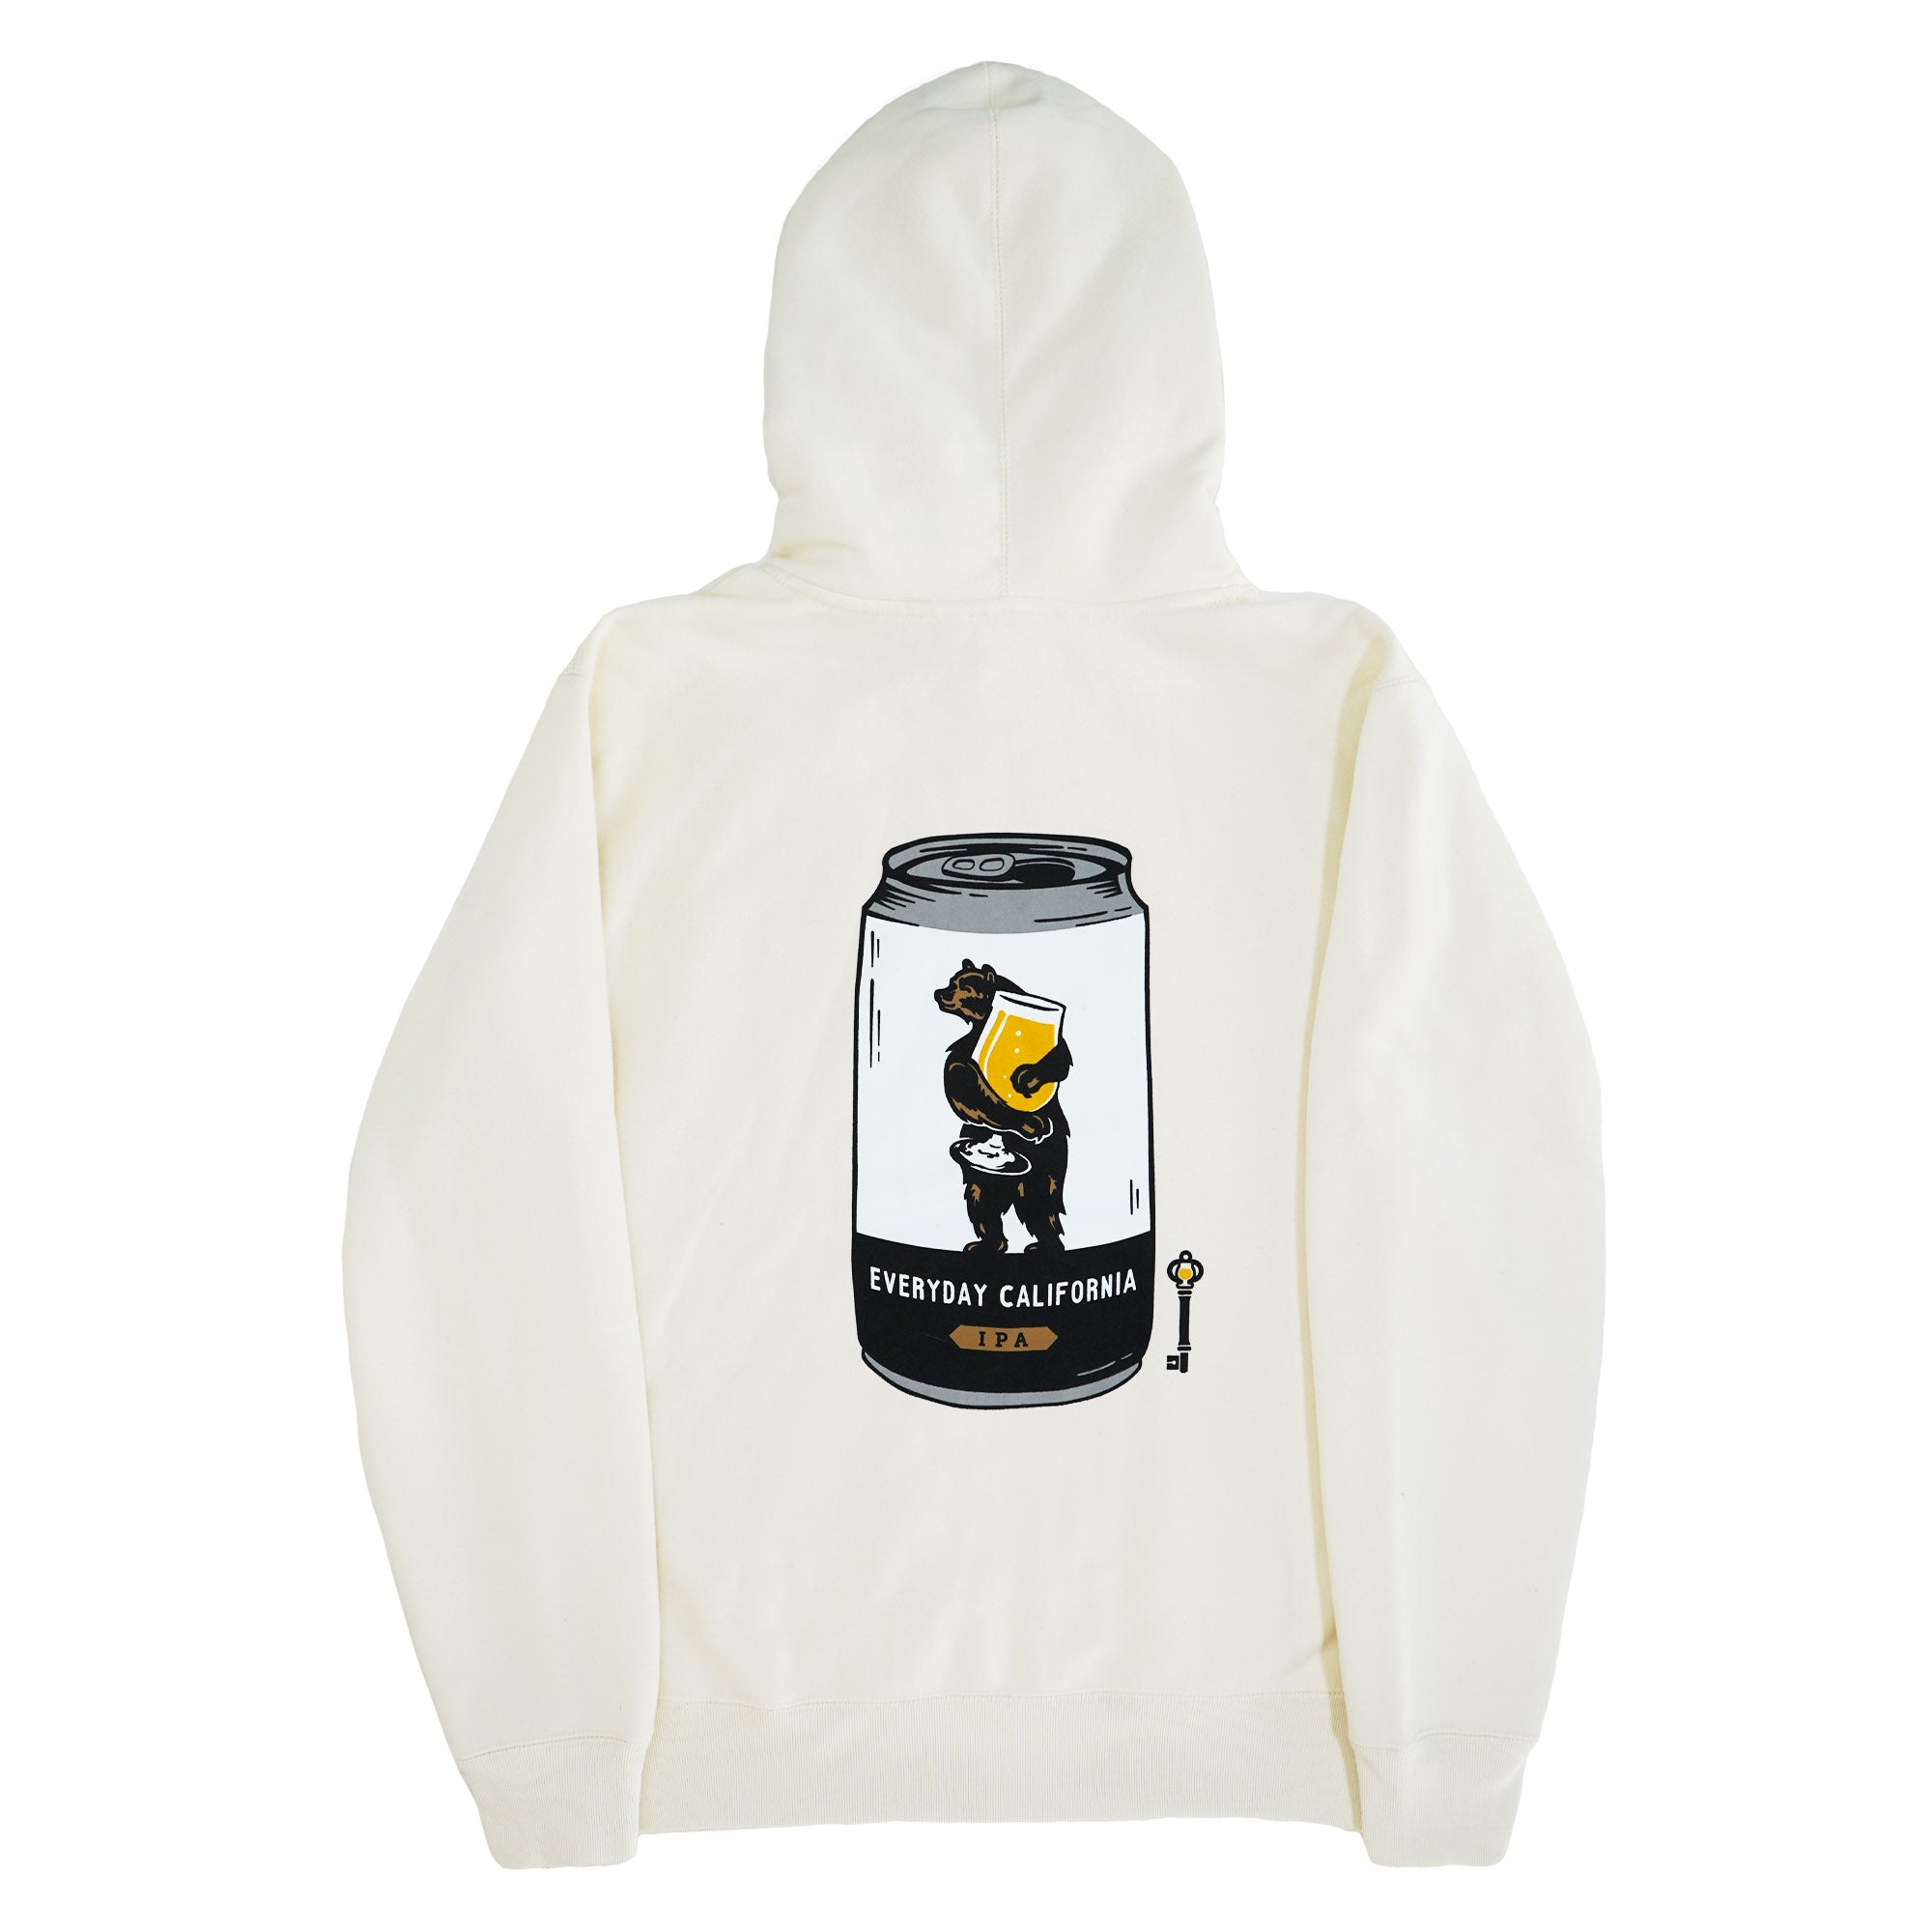 Everyday California Brewmaster Hoodie - thick cream hoodie with Brutus the Bear logo holding a beer